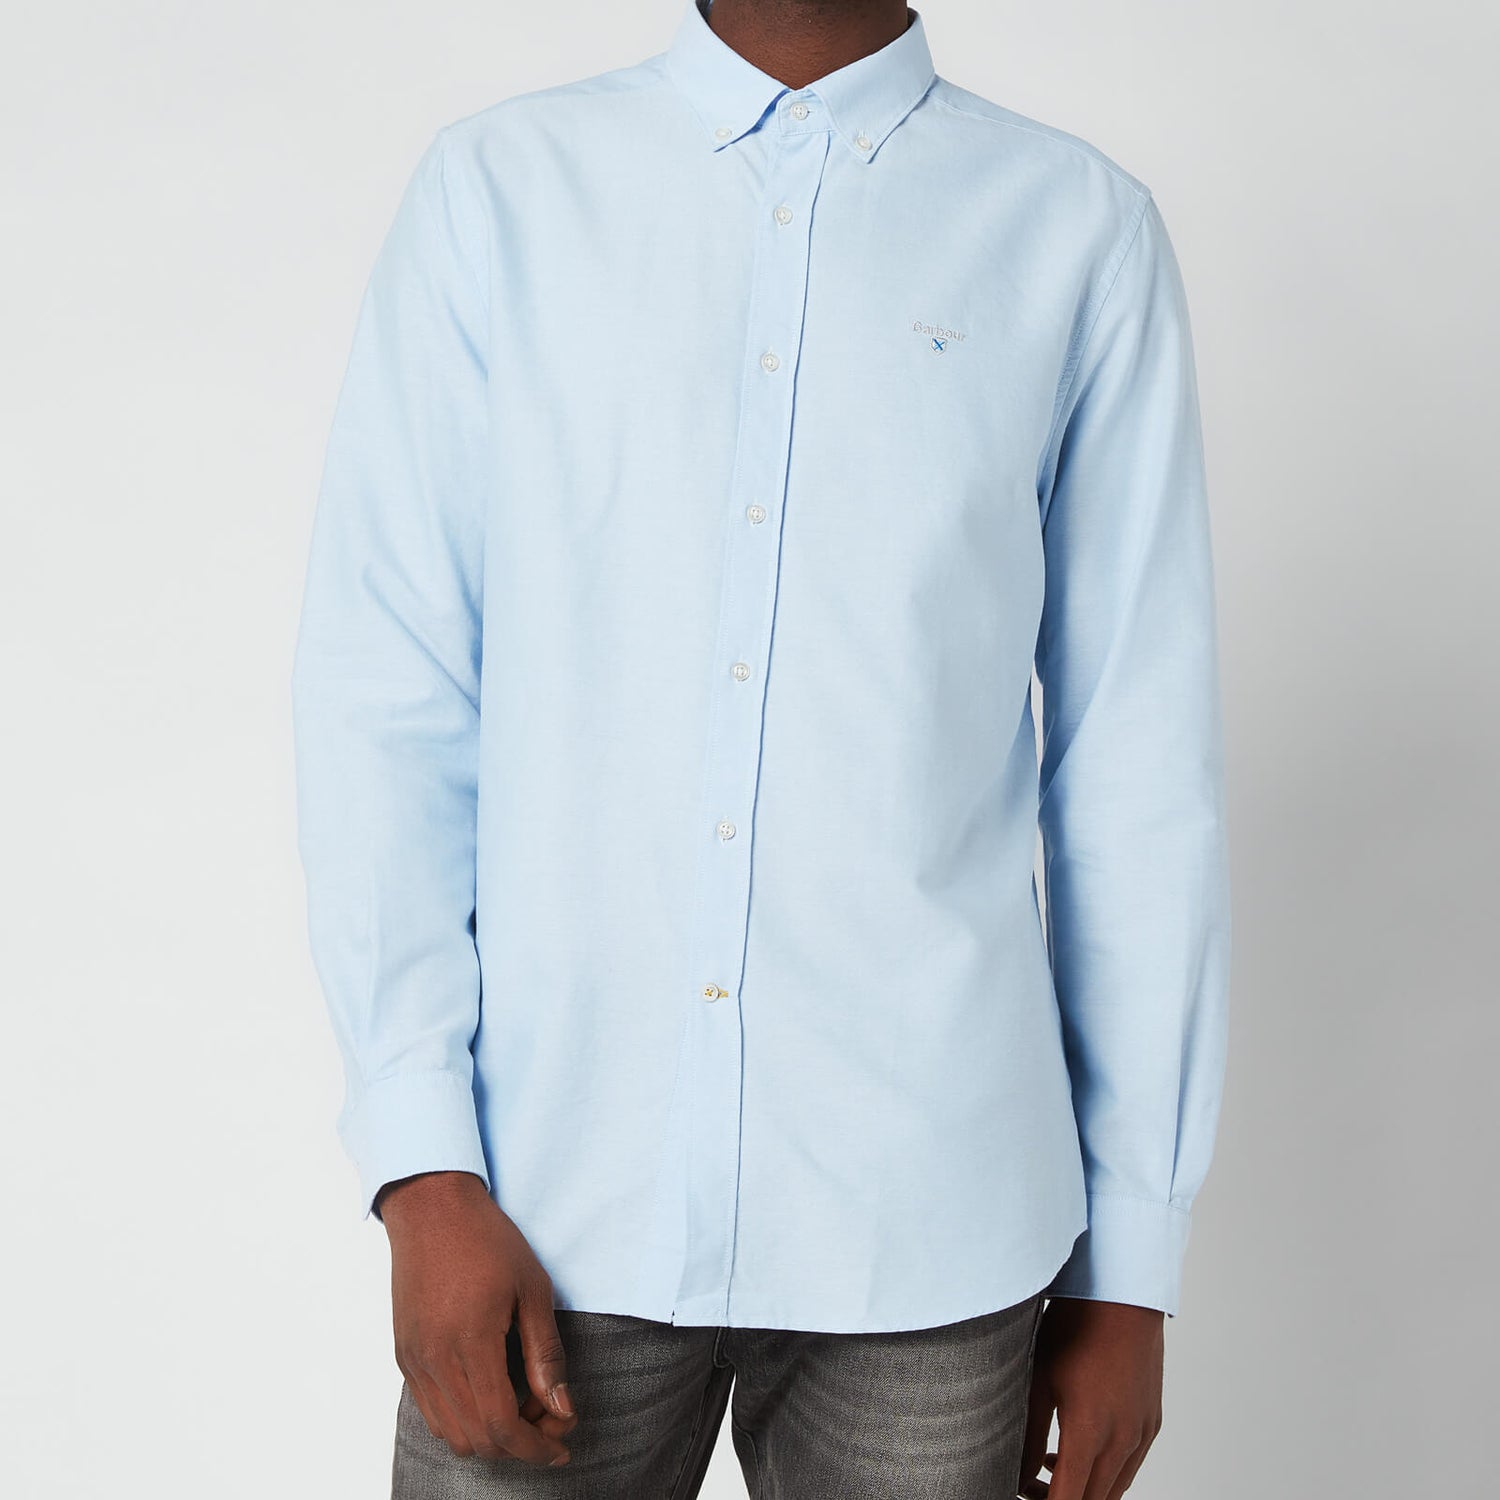 Barbour Men's Oxford 3 Tailored Fit Shirt - Sky